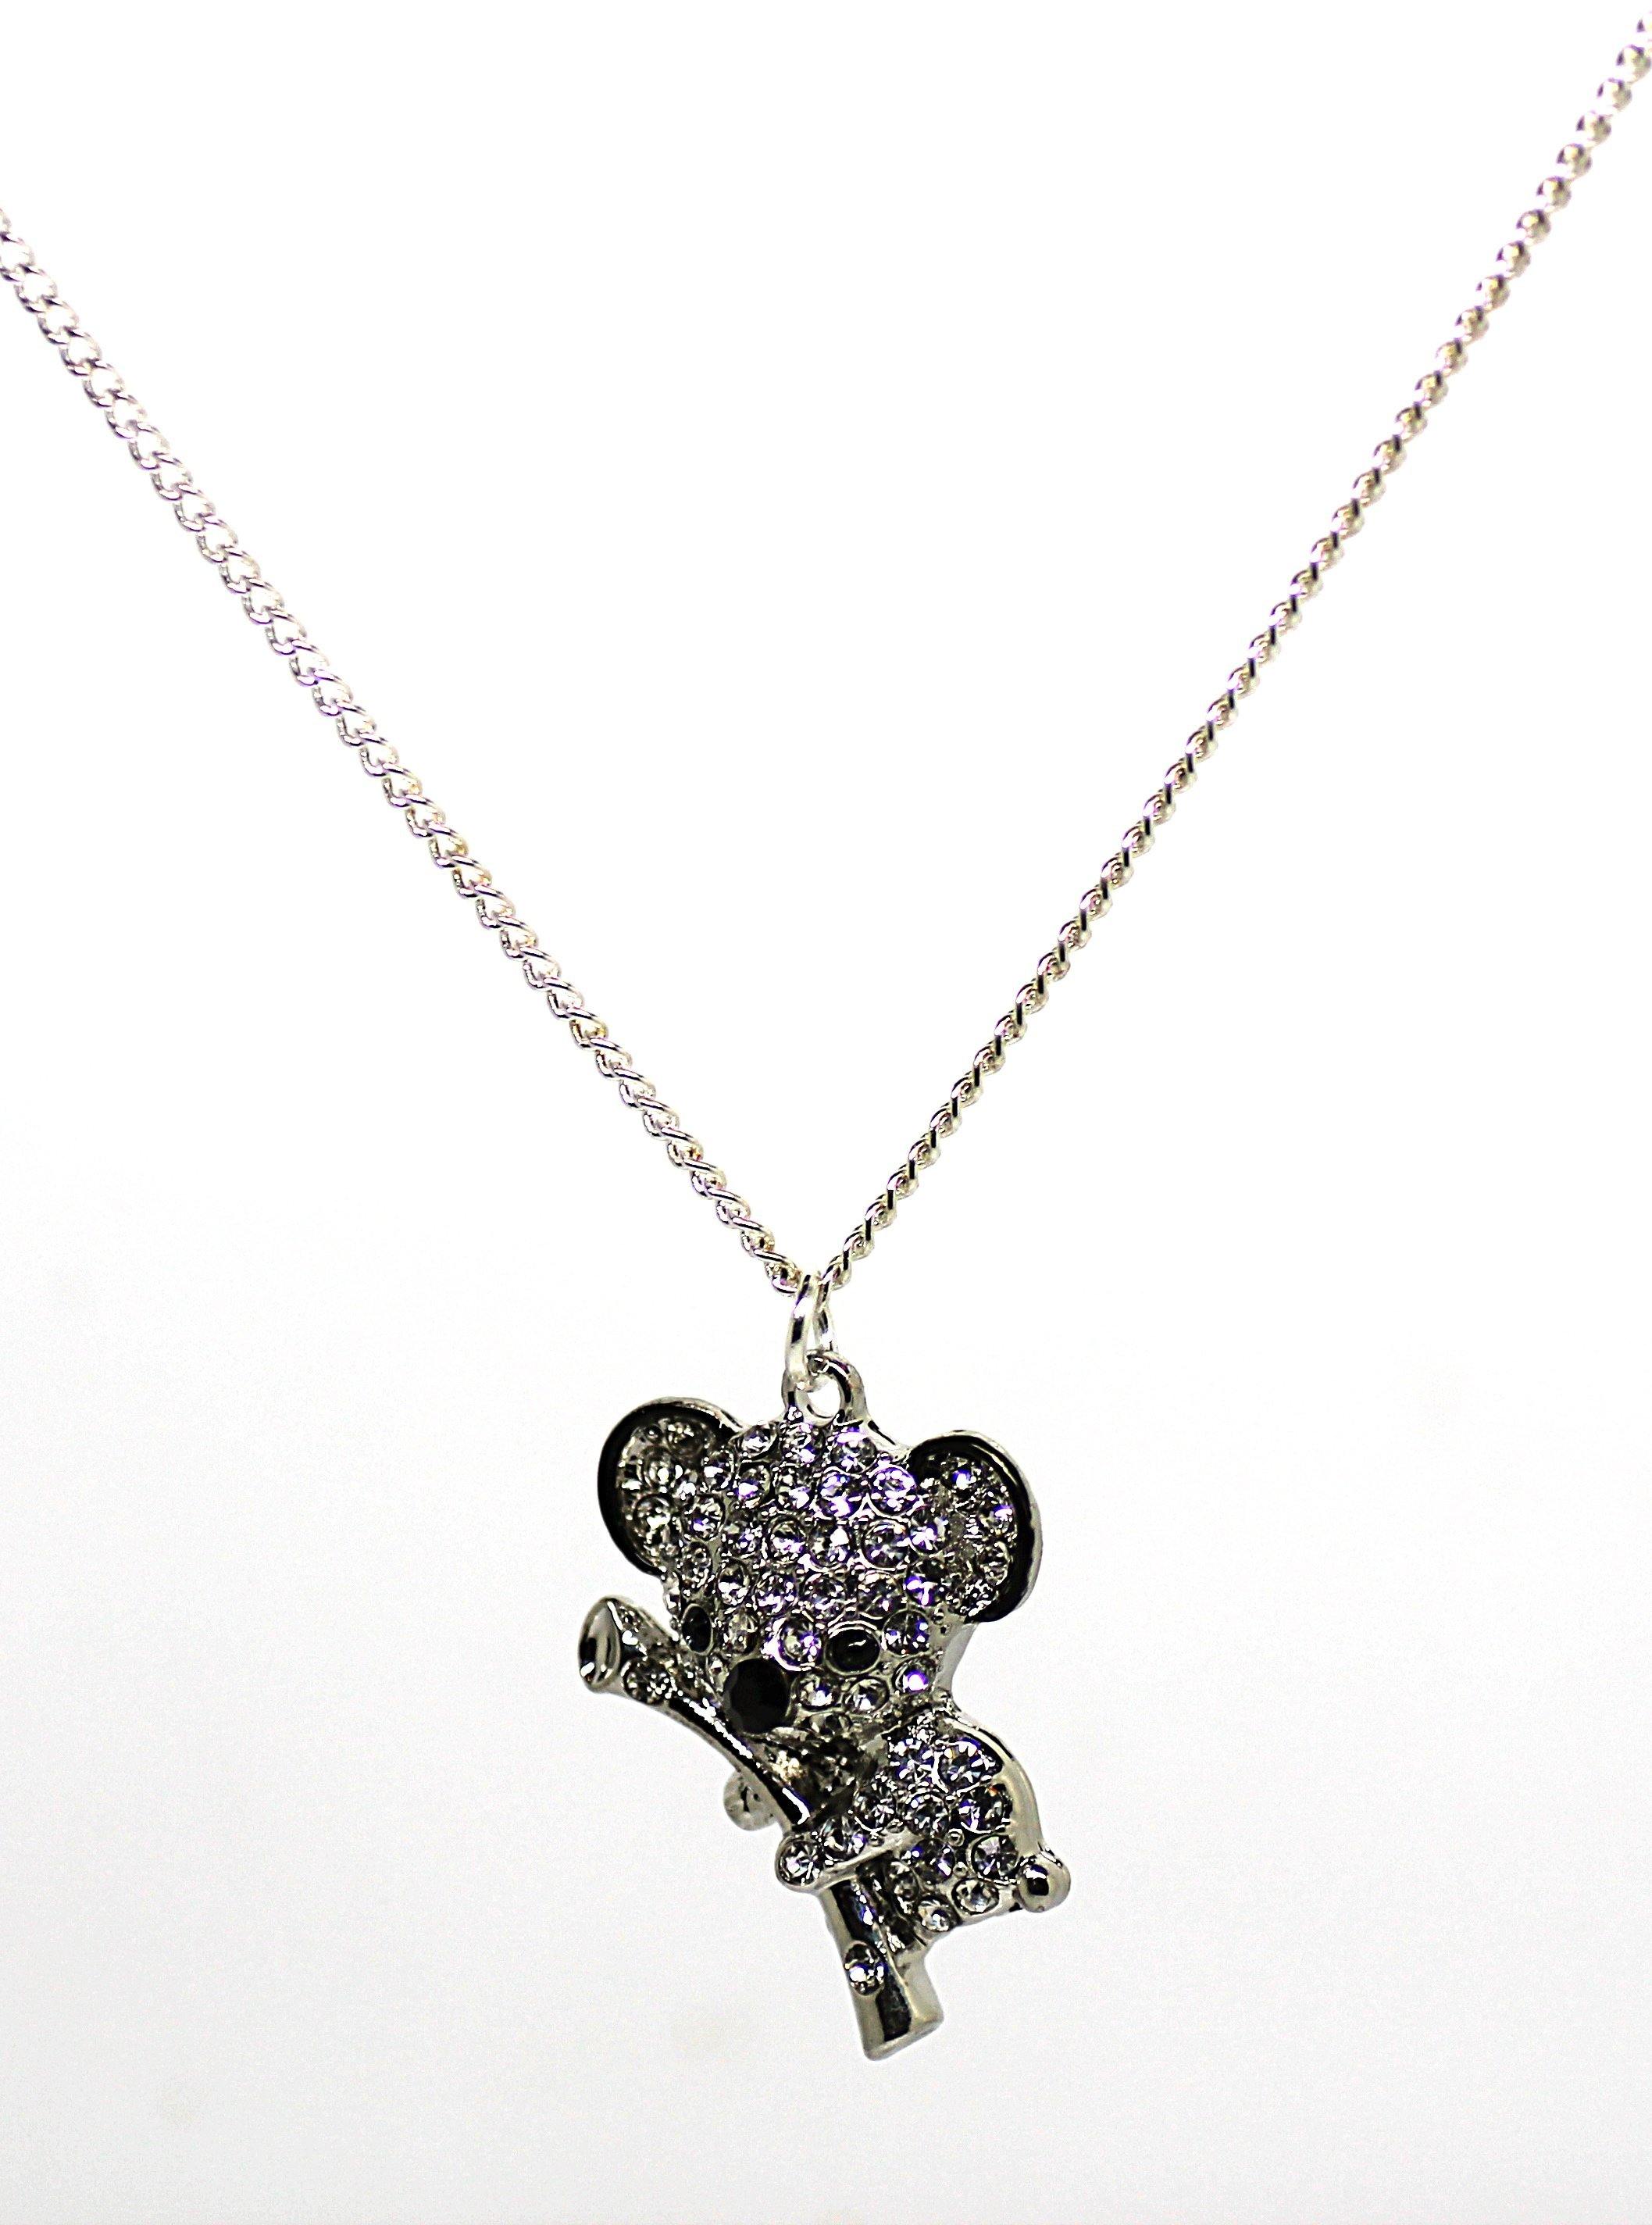 Koala Clear Necklace - Wildtouch - Wildtouch